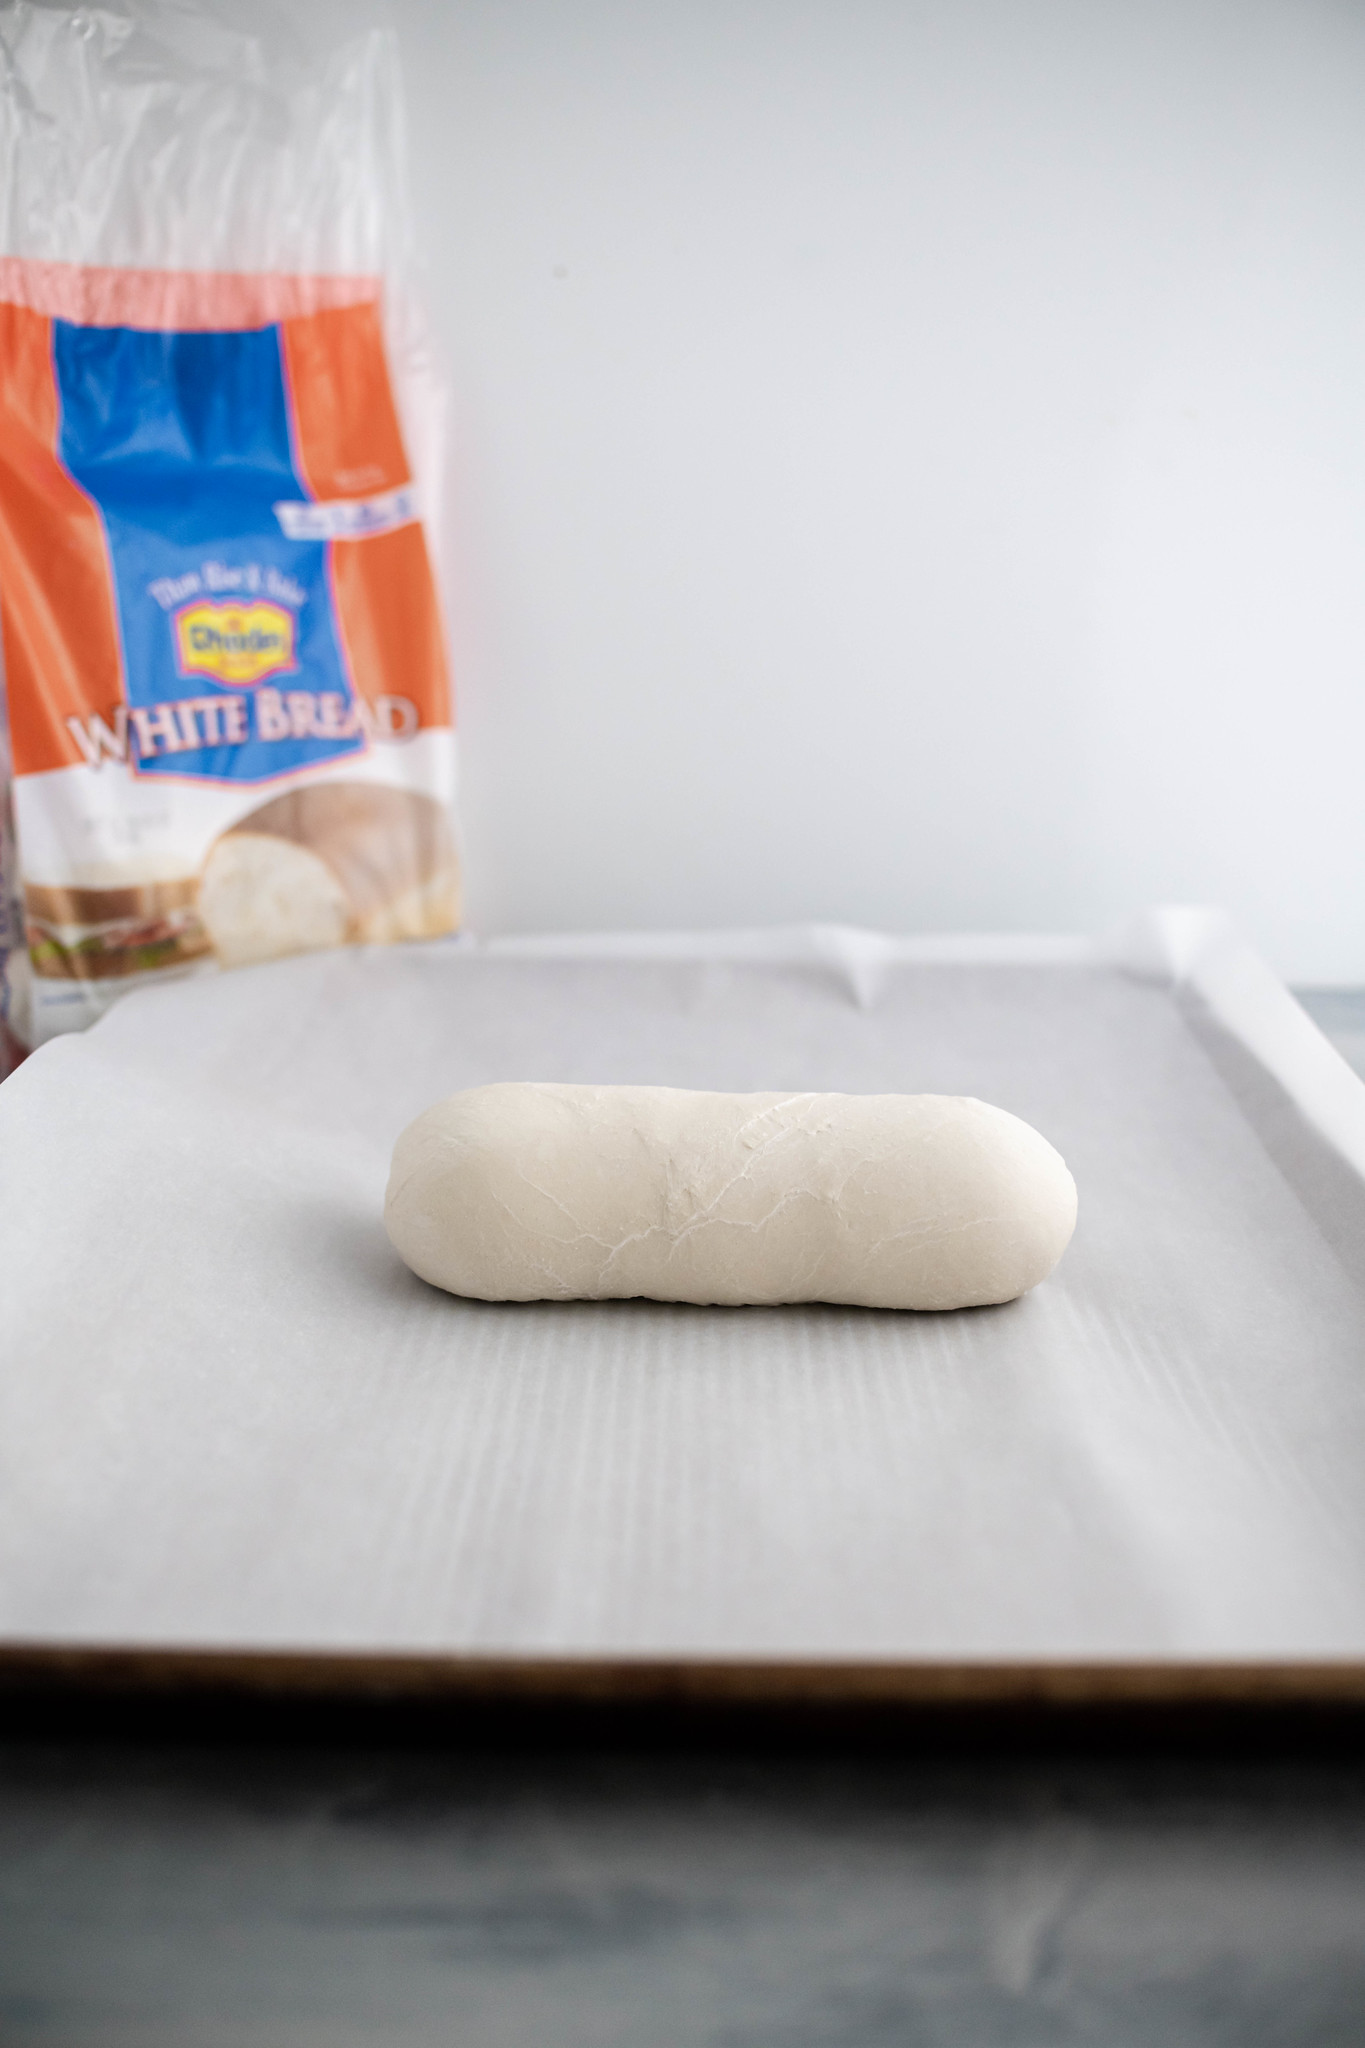 One loaf of Rhodes bread dough on a parchment lined baking sheet.